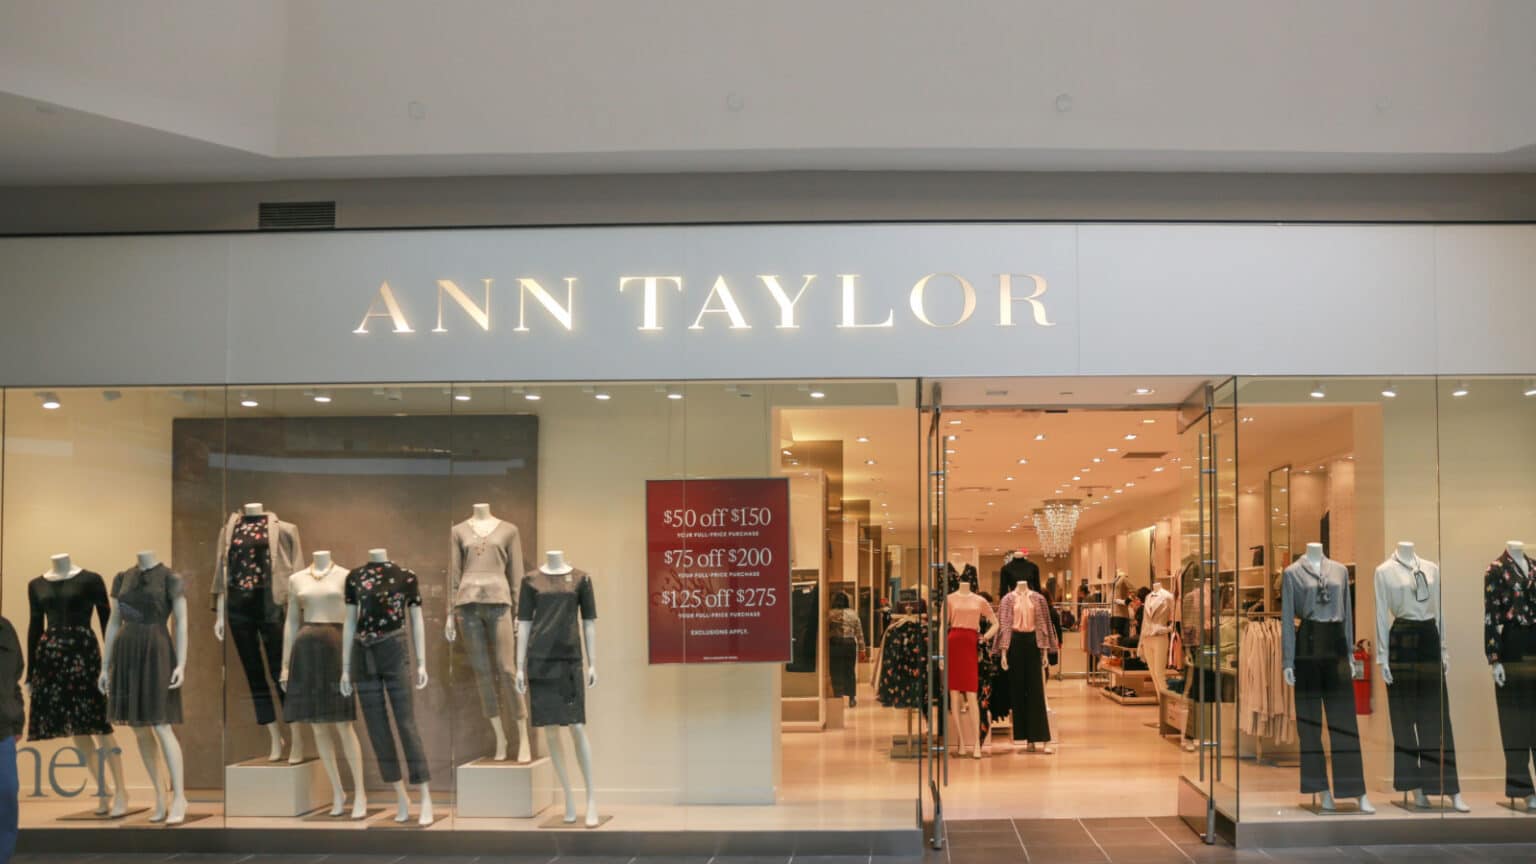 20 Stores Like Ann Taylor For A Polished Look